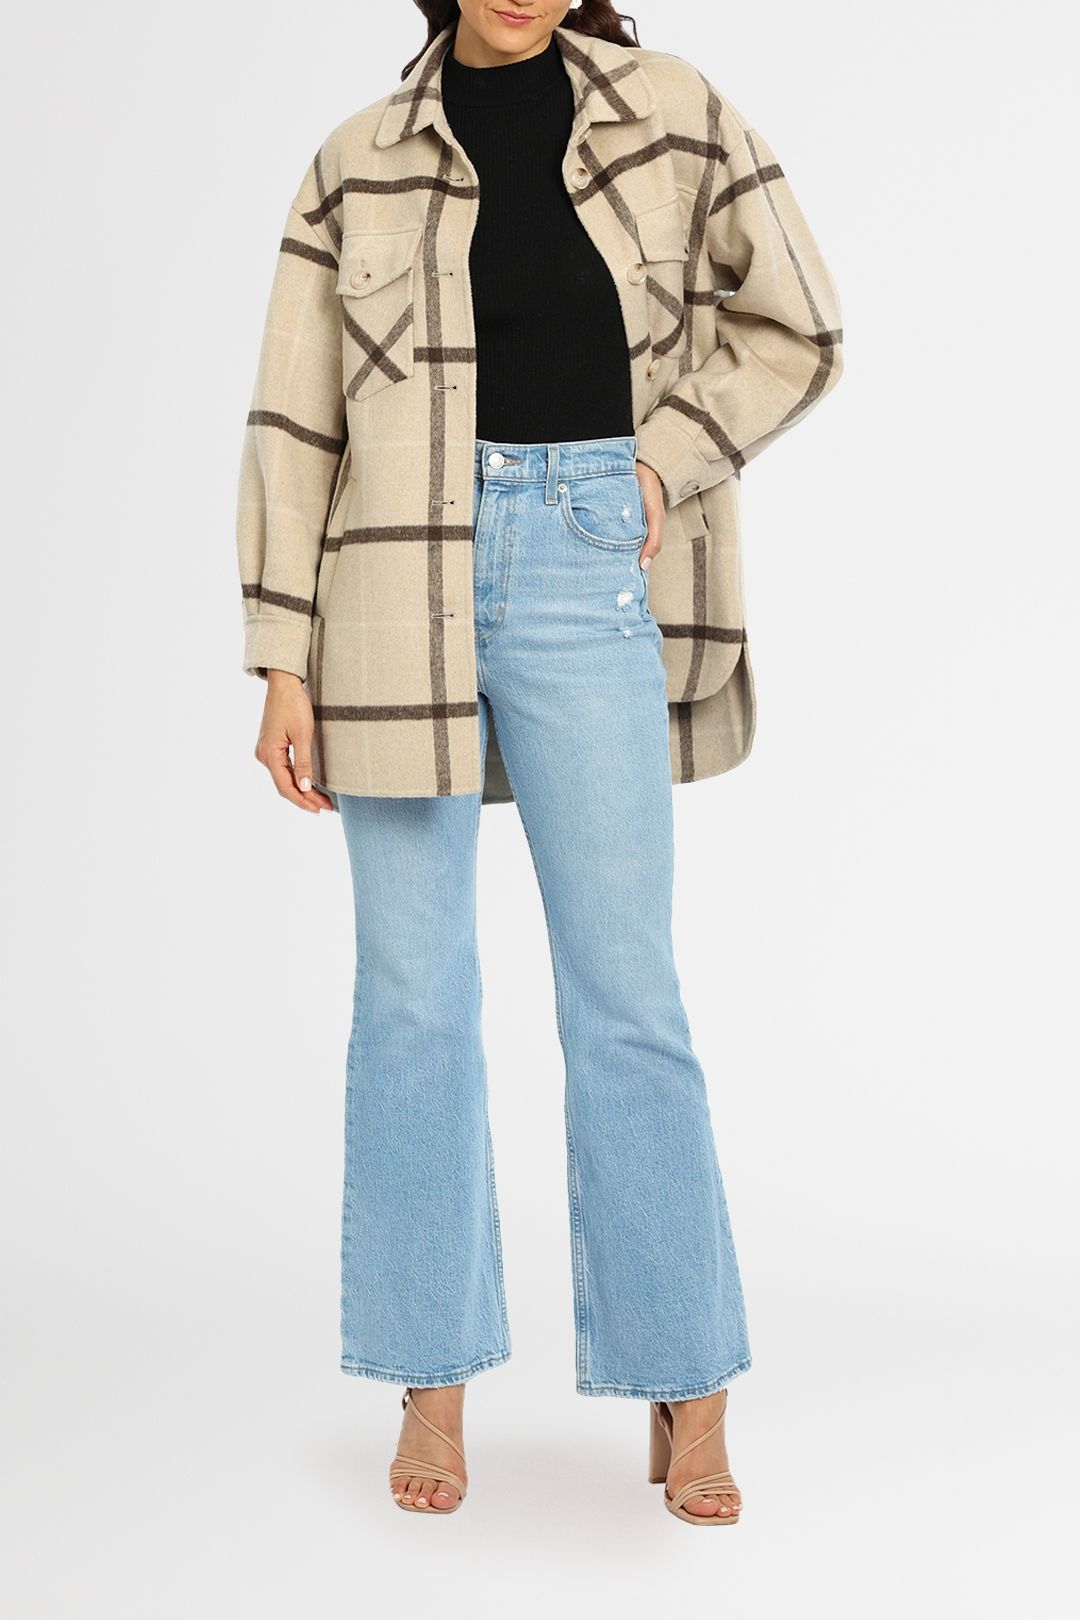 Belle and Bloom Rivers Edge Plaid Shacket Beige